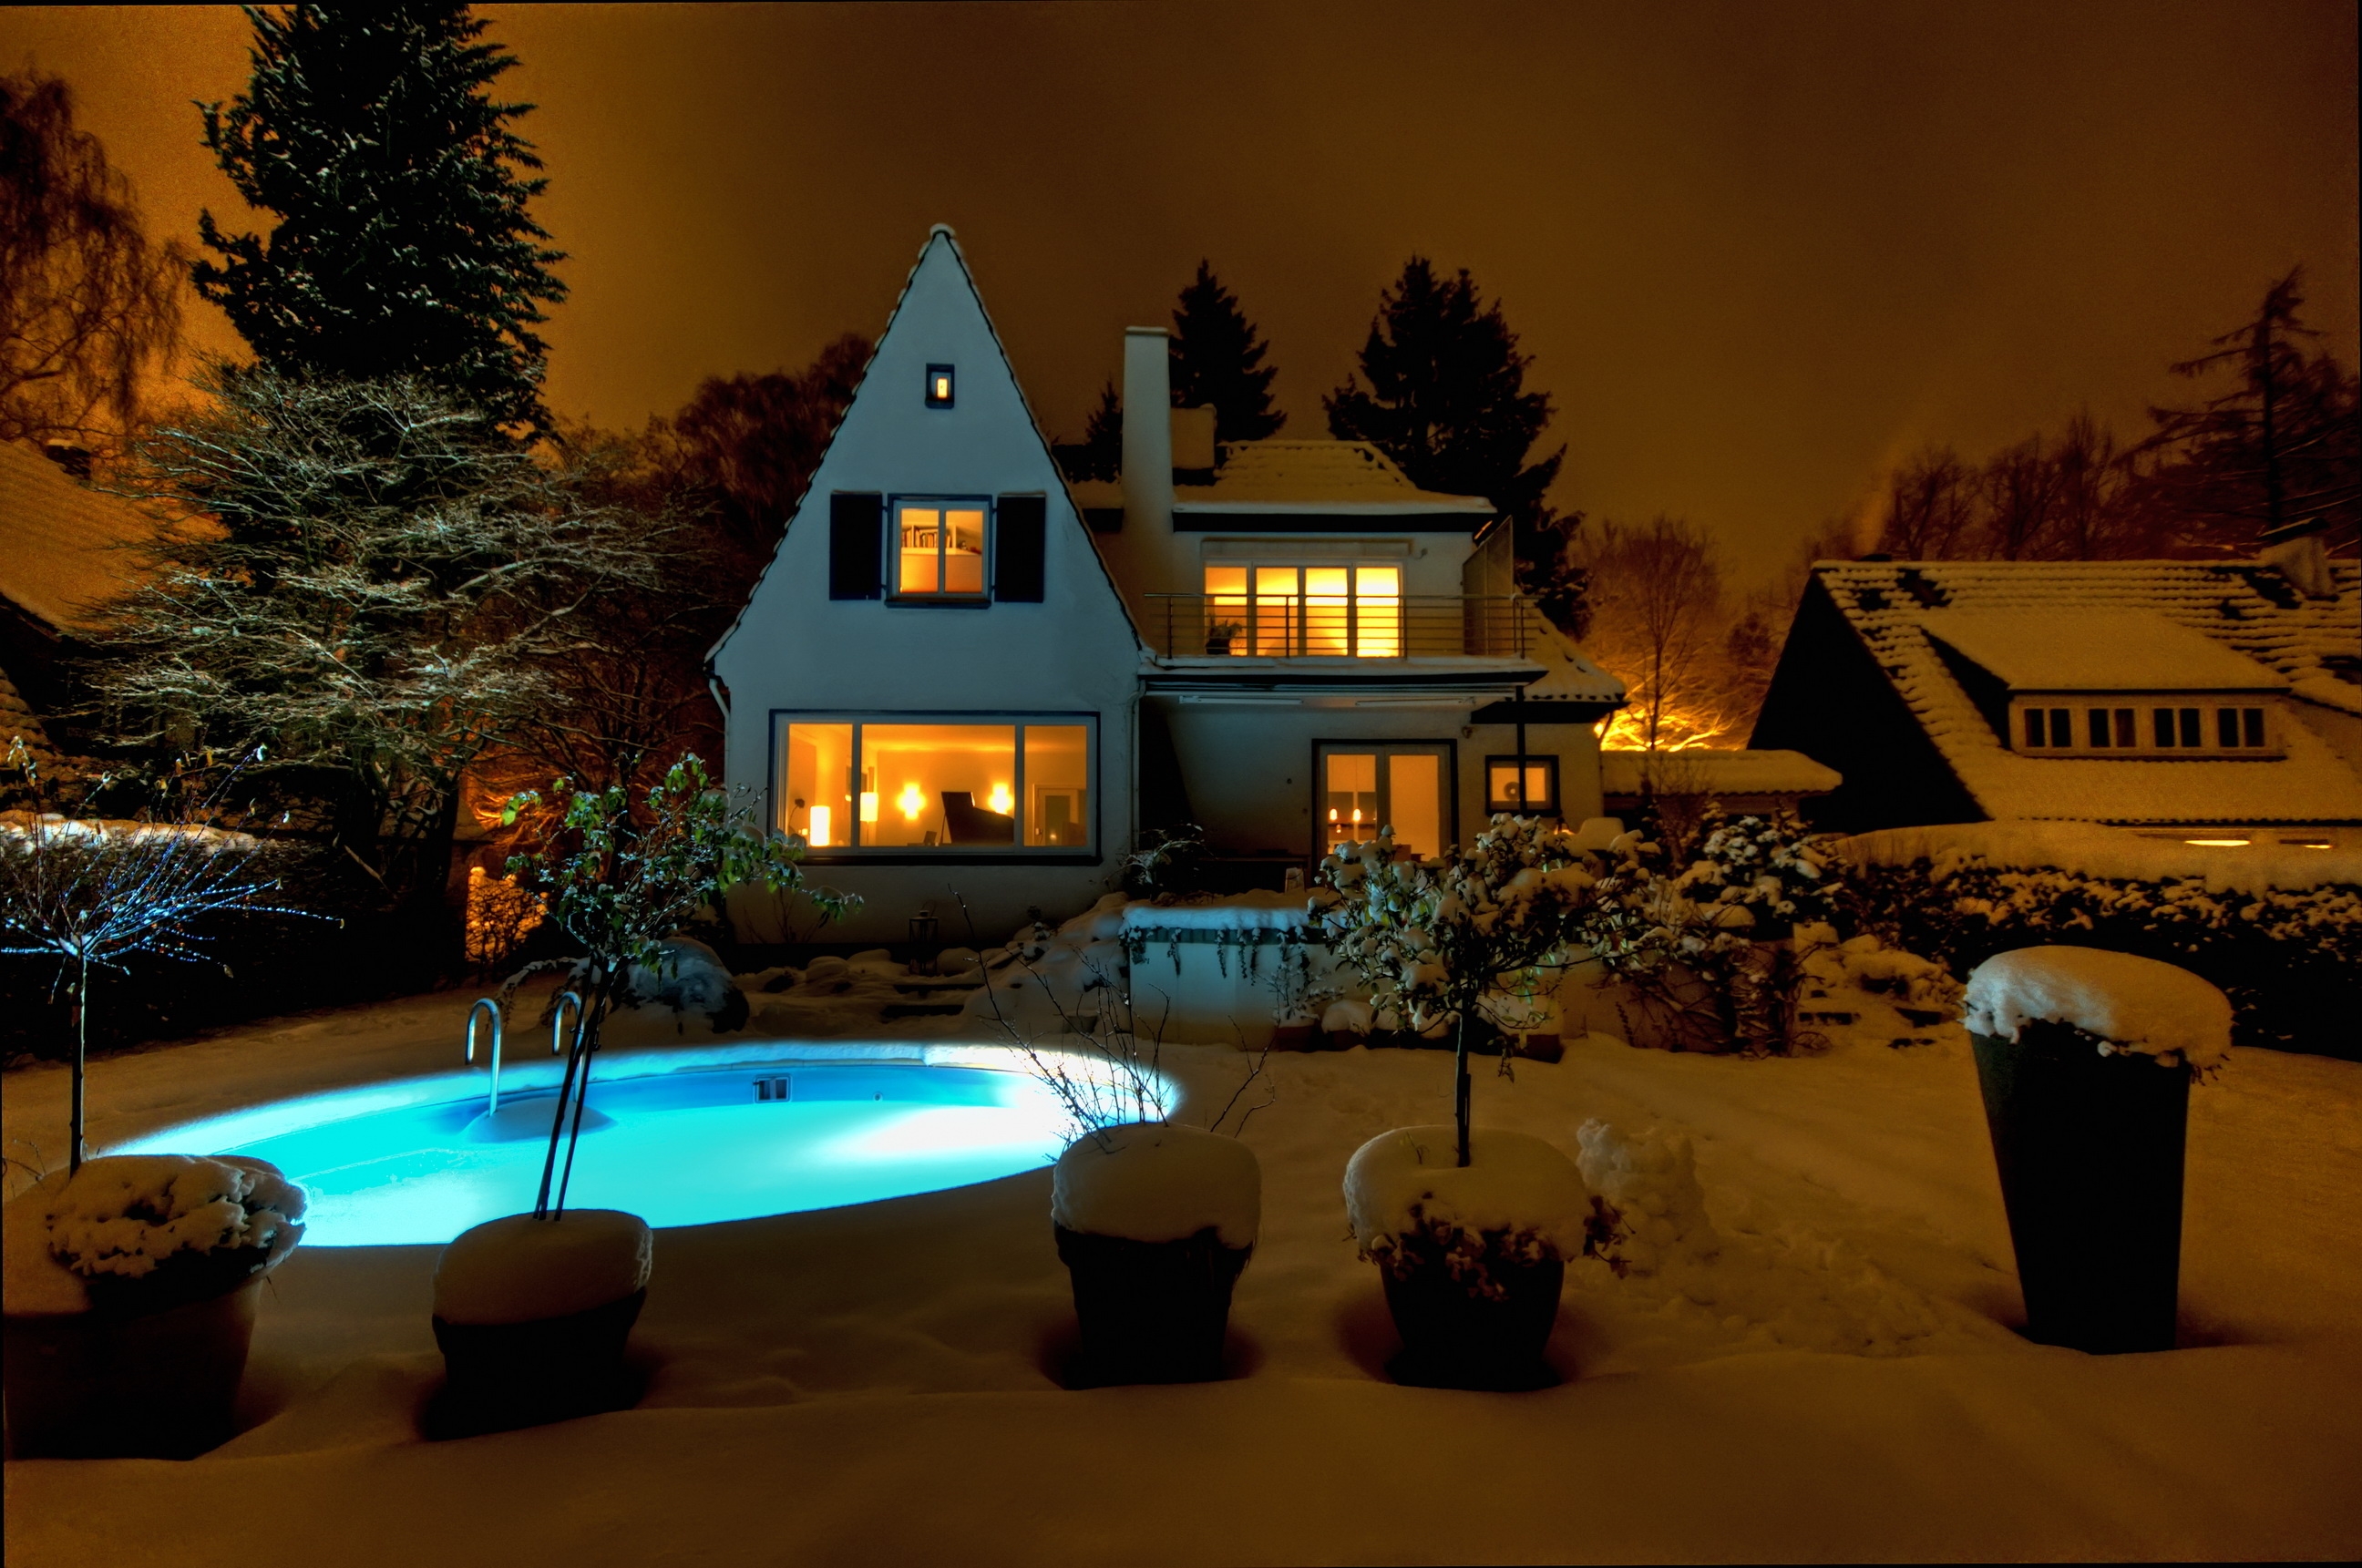 houses, cities, night, snow, mansion, pools 1080p